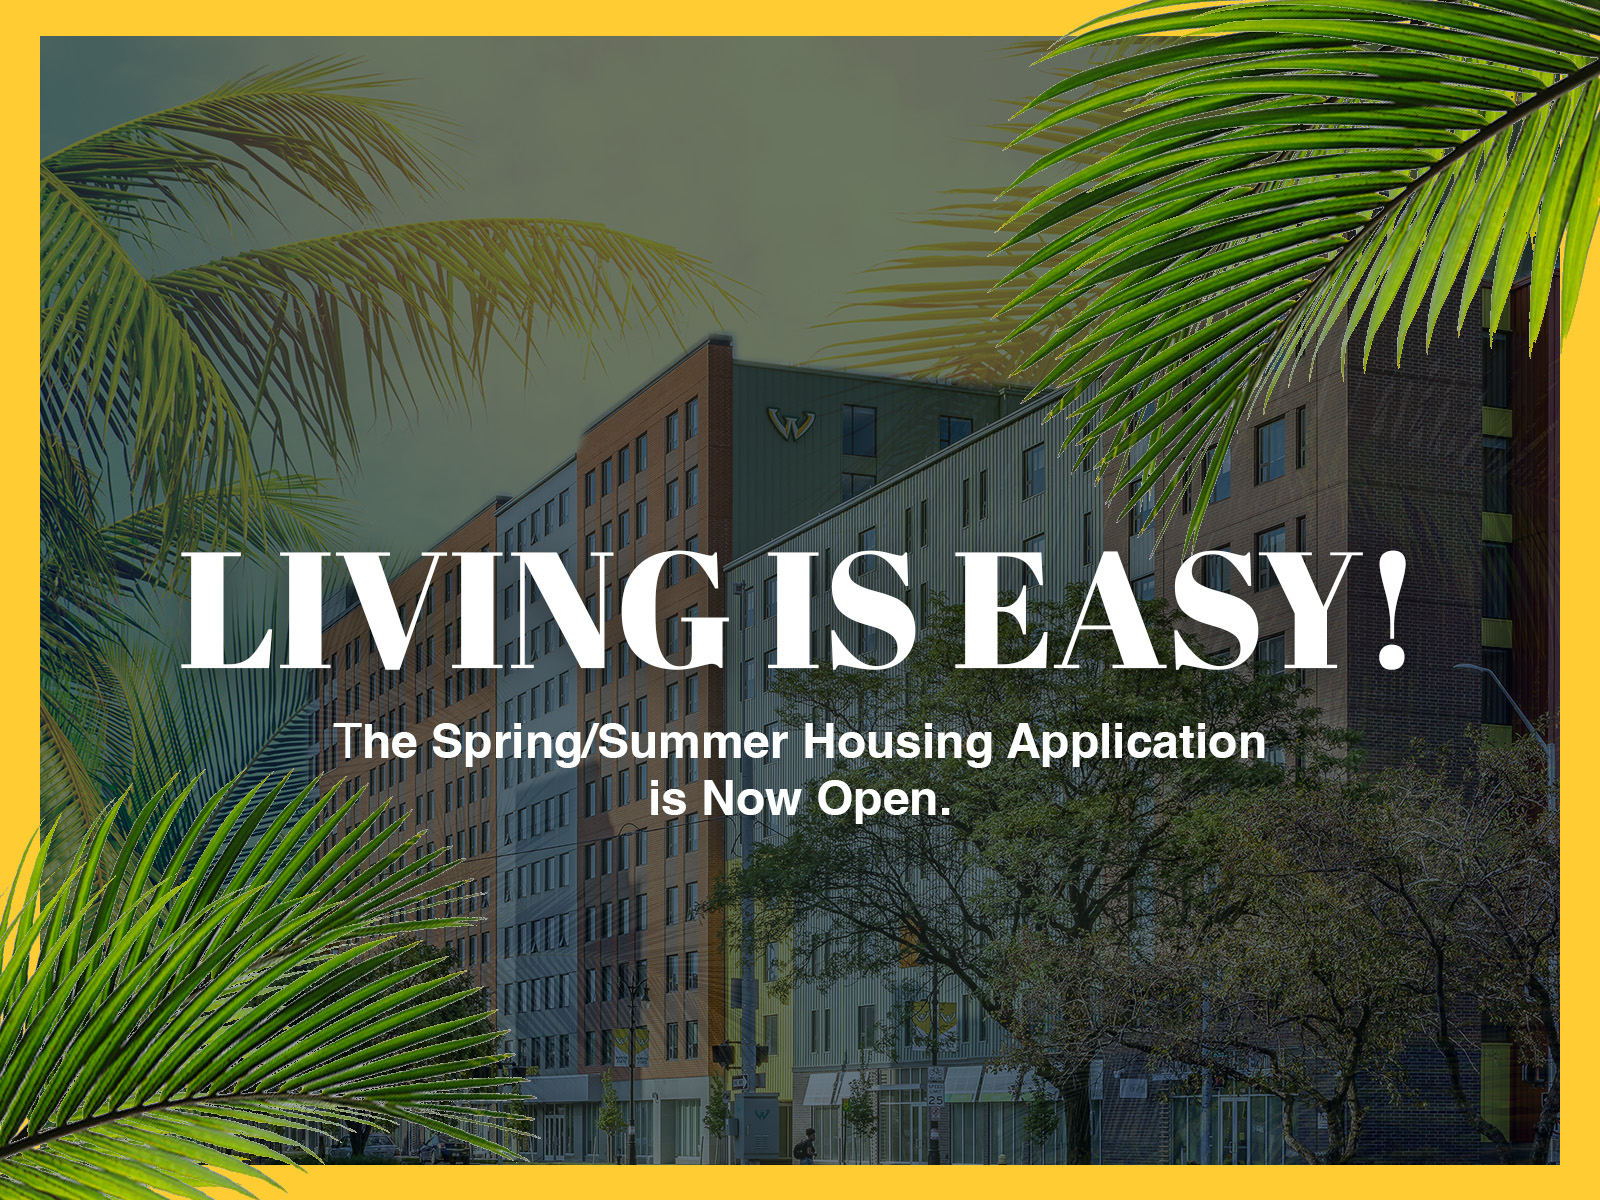 Call Campus Home this Spring/summer